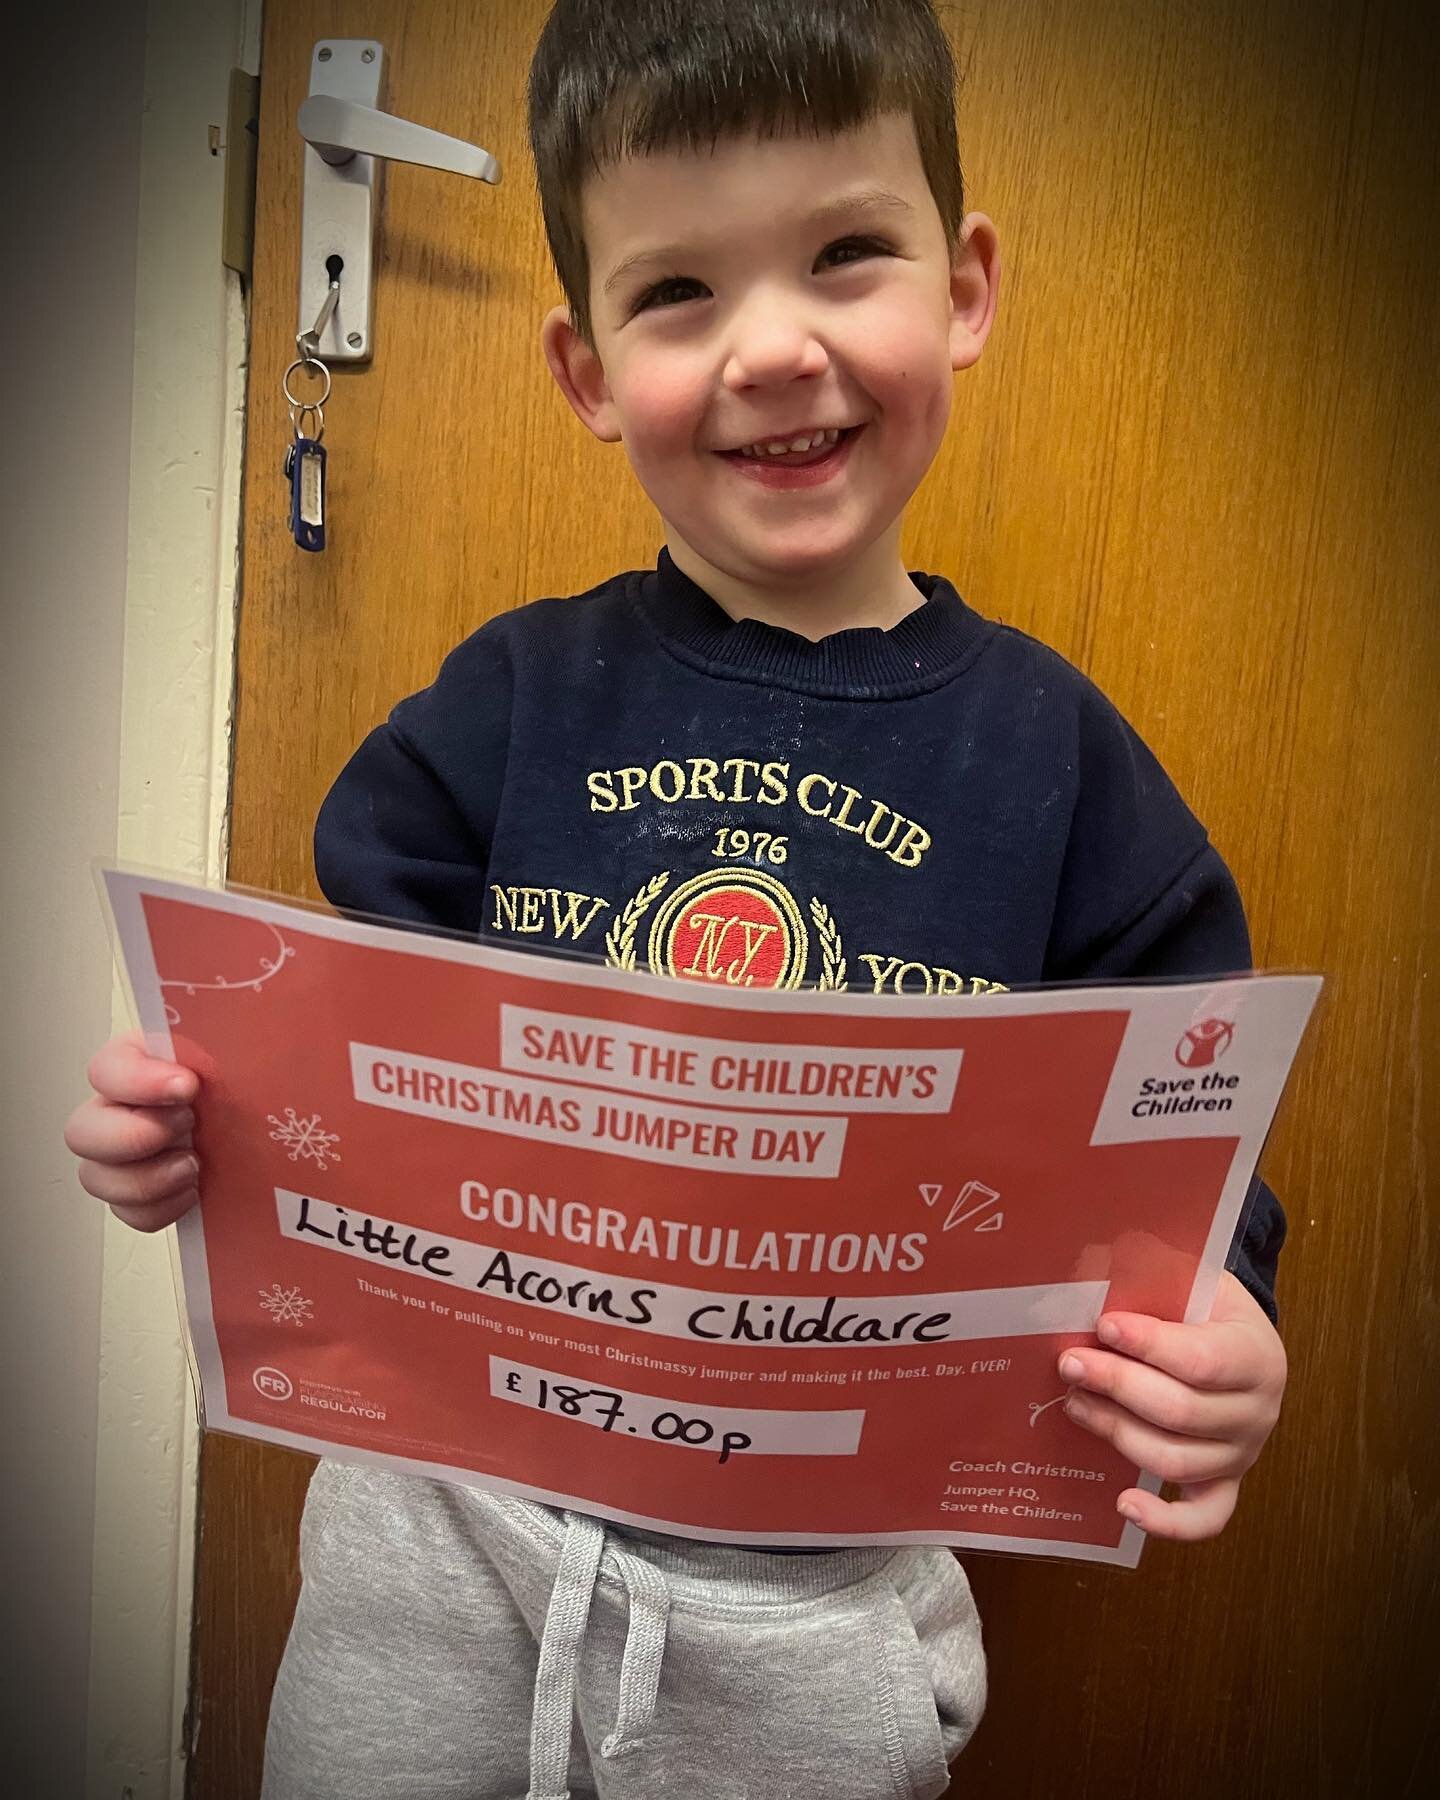 🎄 Oh what fun we had on Christmas jumper day!
..
..
Joes big cute smile can only mean one thing, he is extremely happy that we raised &pound;187.00 for #savethechildren 🙌
..
..
A huge thank you to everyone who shared our post, to who donated &amp; 